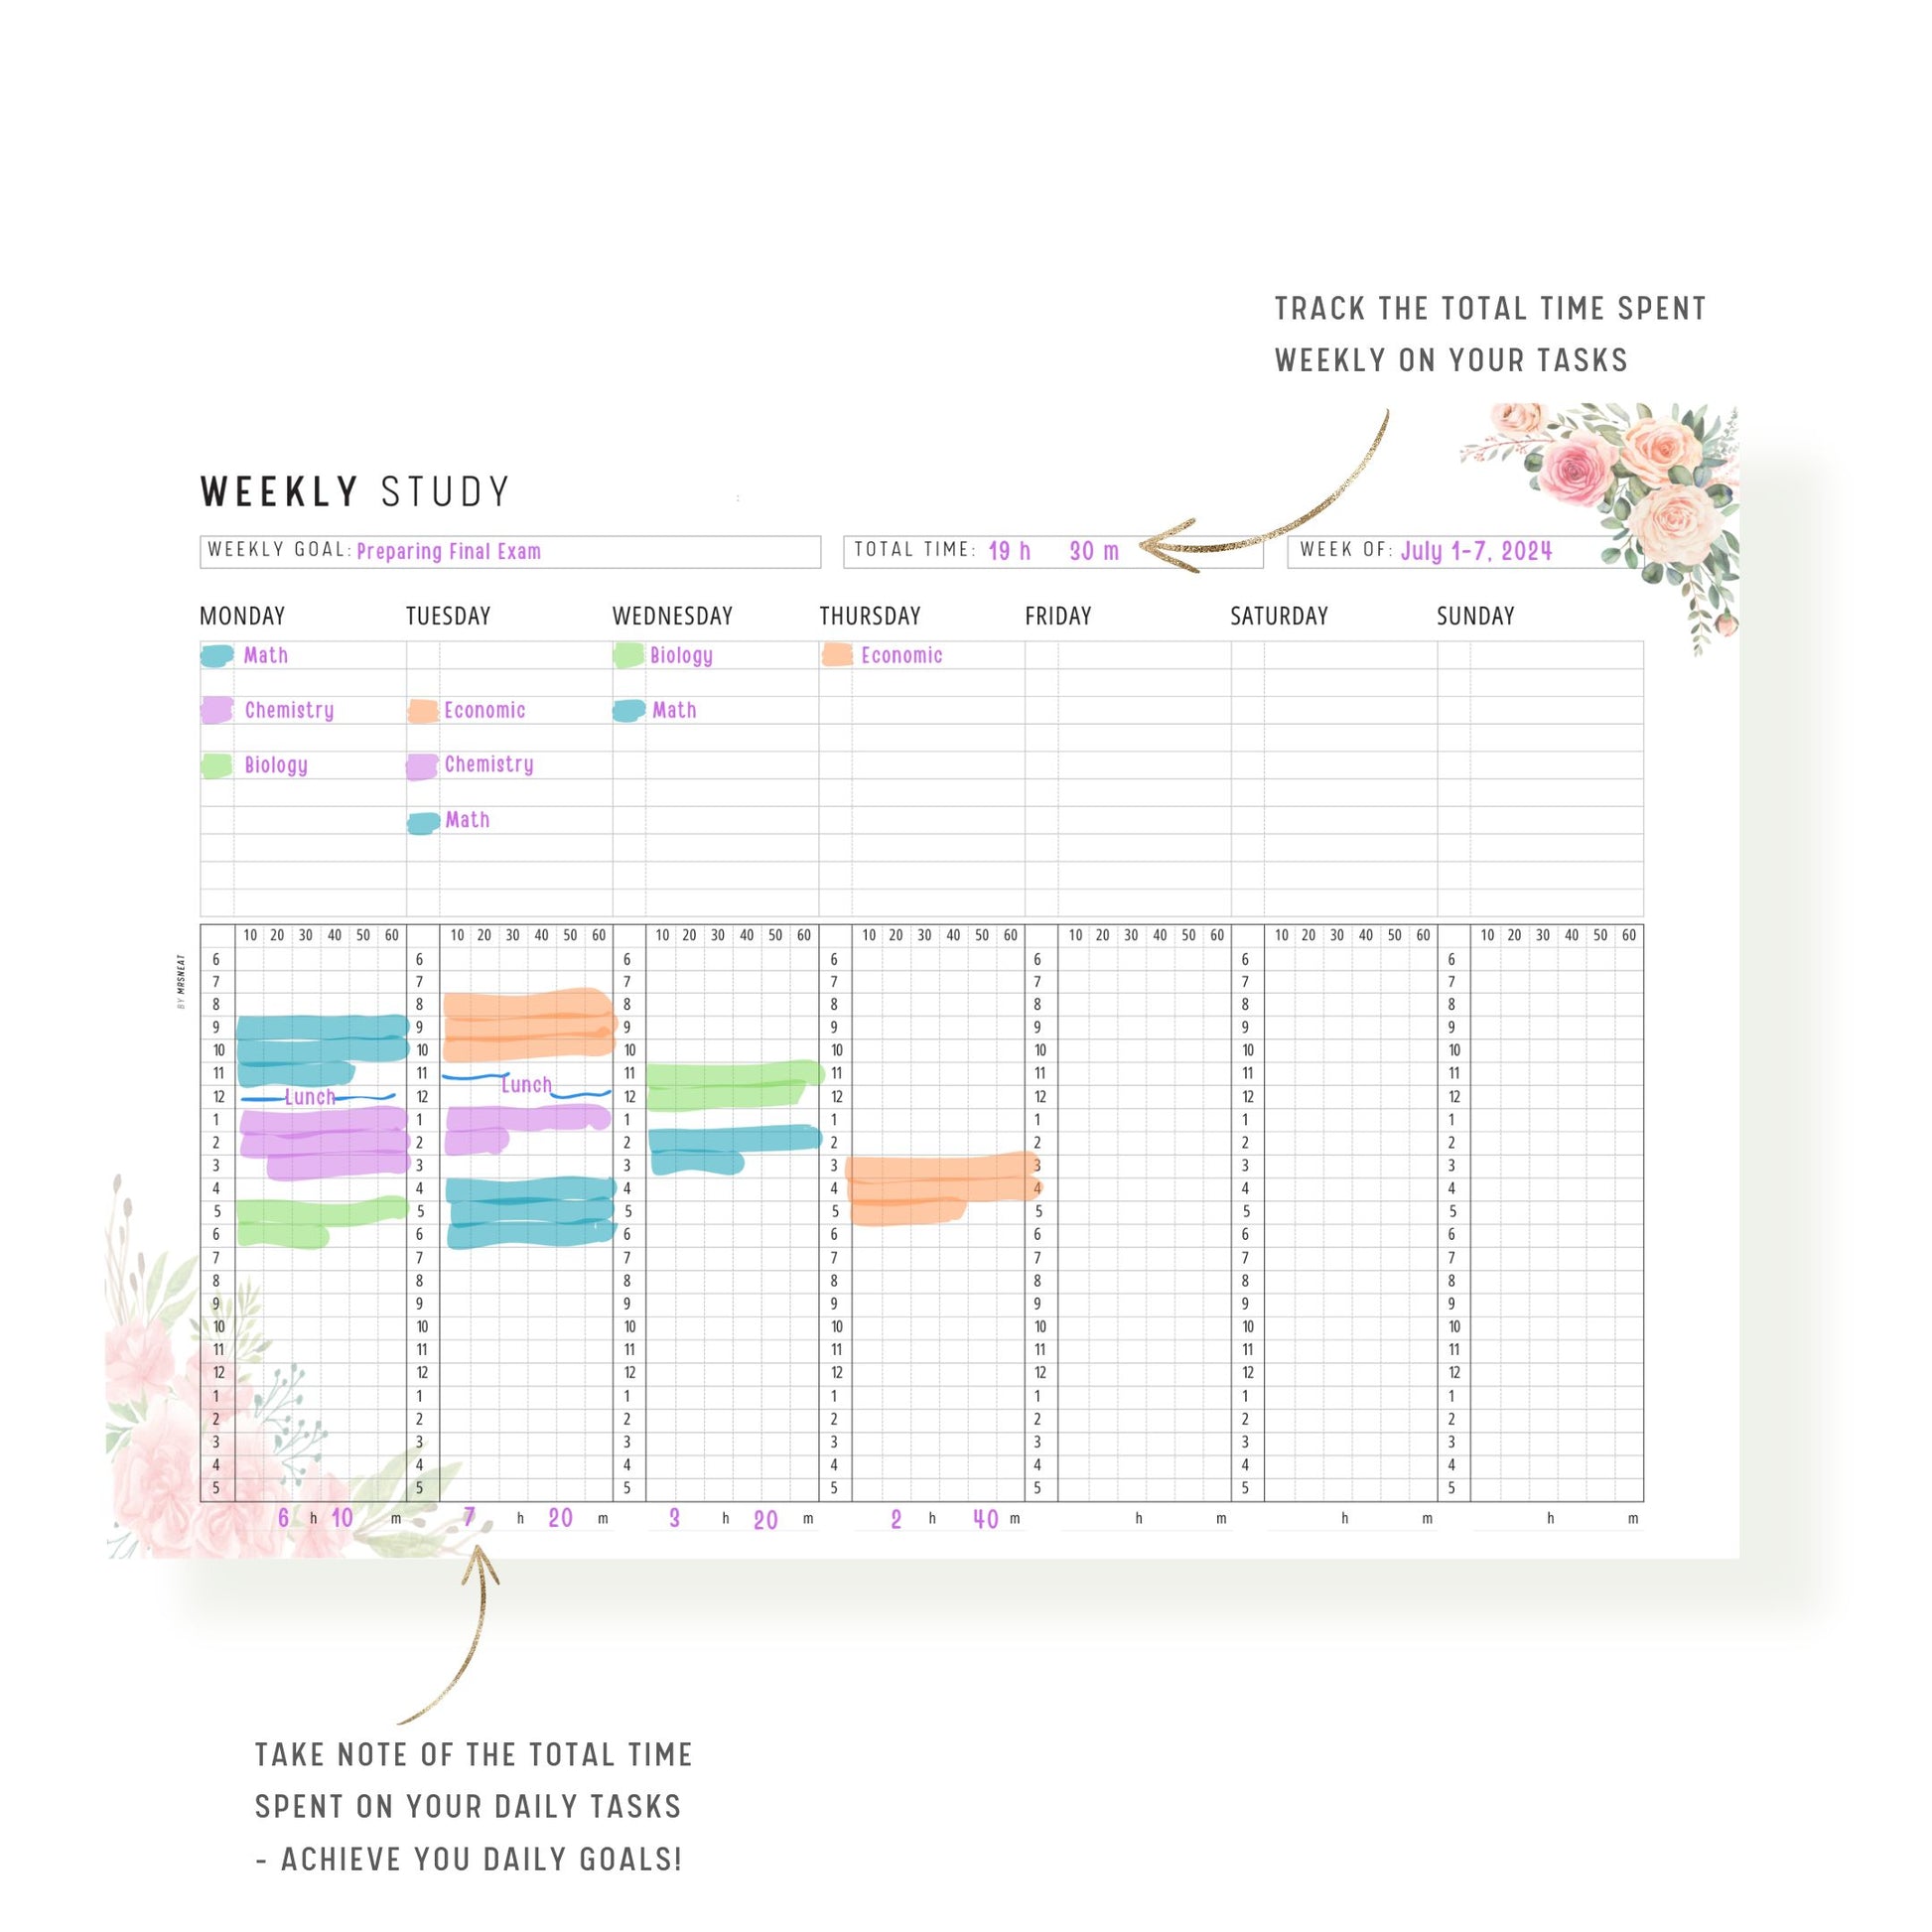 Weekly Study Tracker Template